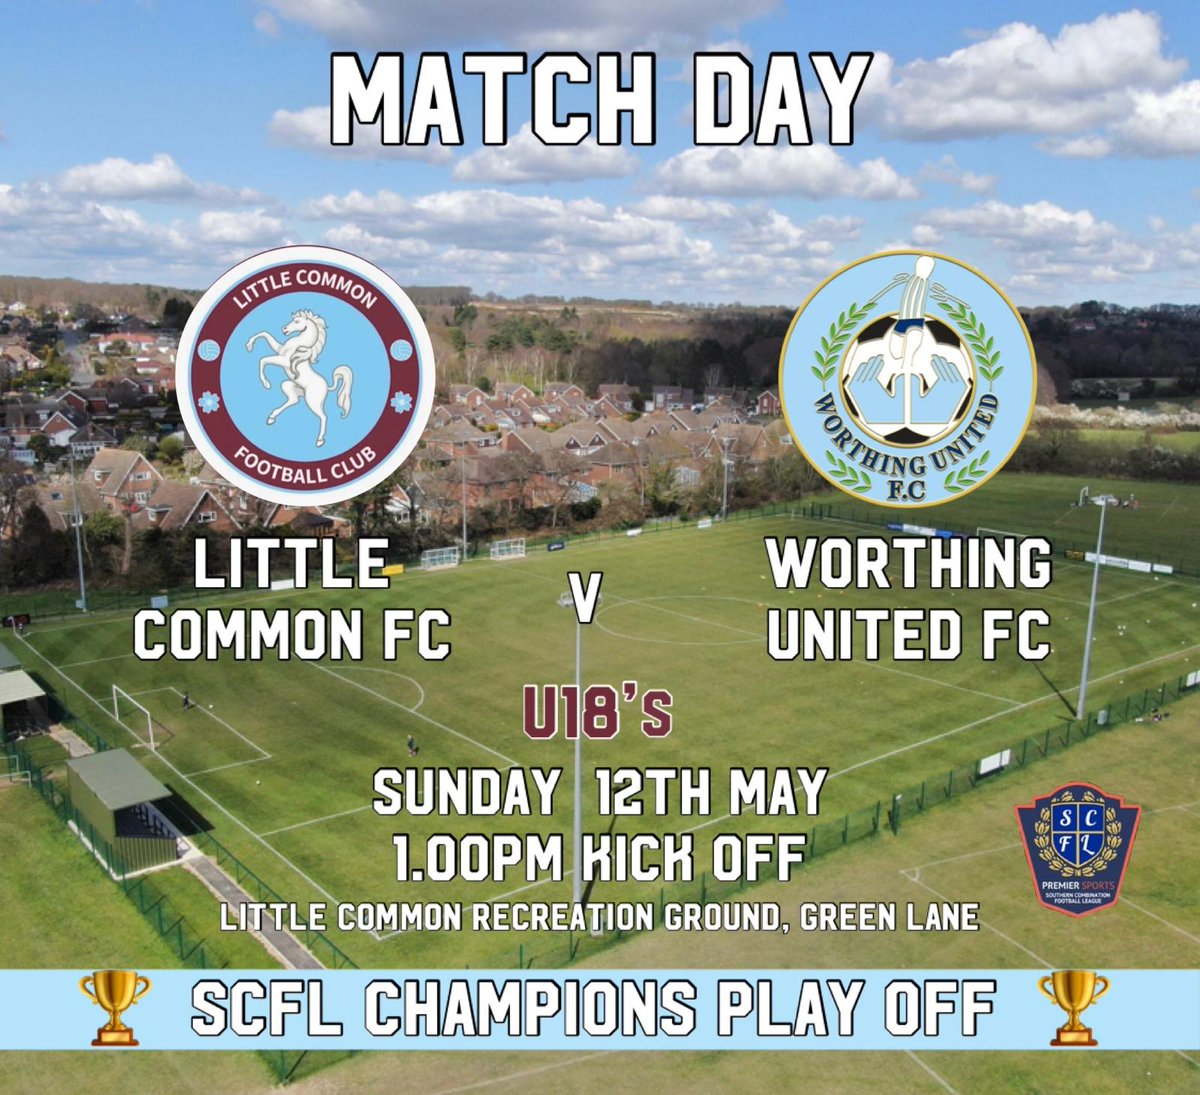 It is a super Sunday at the Rec this weekend with our title winning U18's in action at 1pm following the Linda Freeman Charity match at 10.30am.